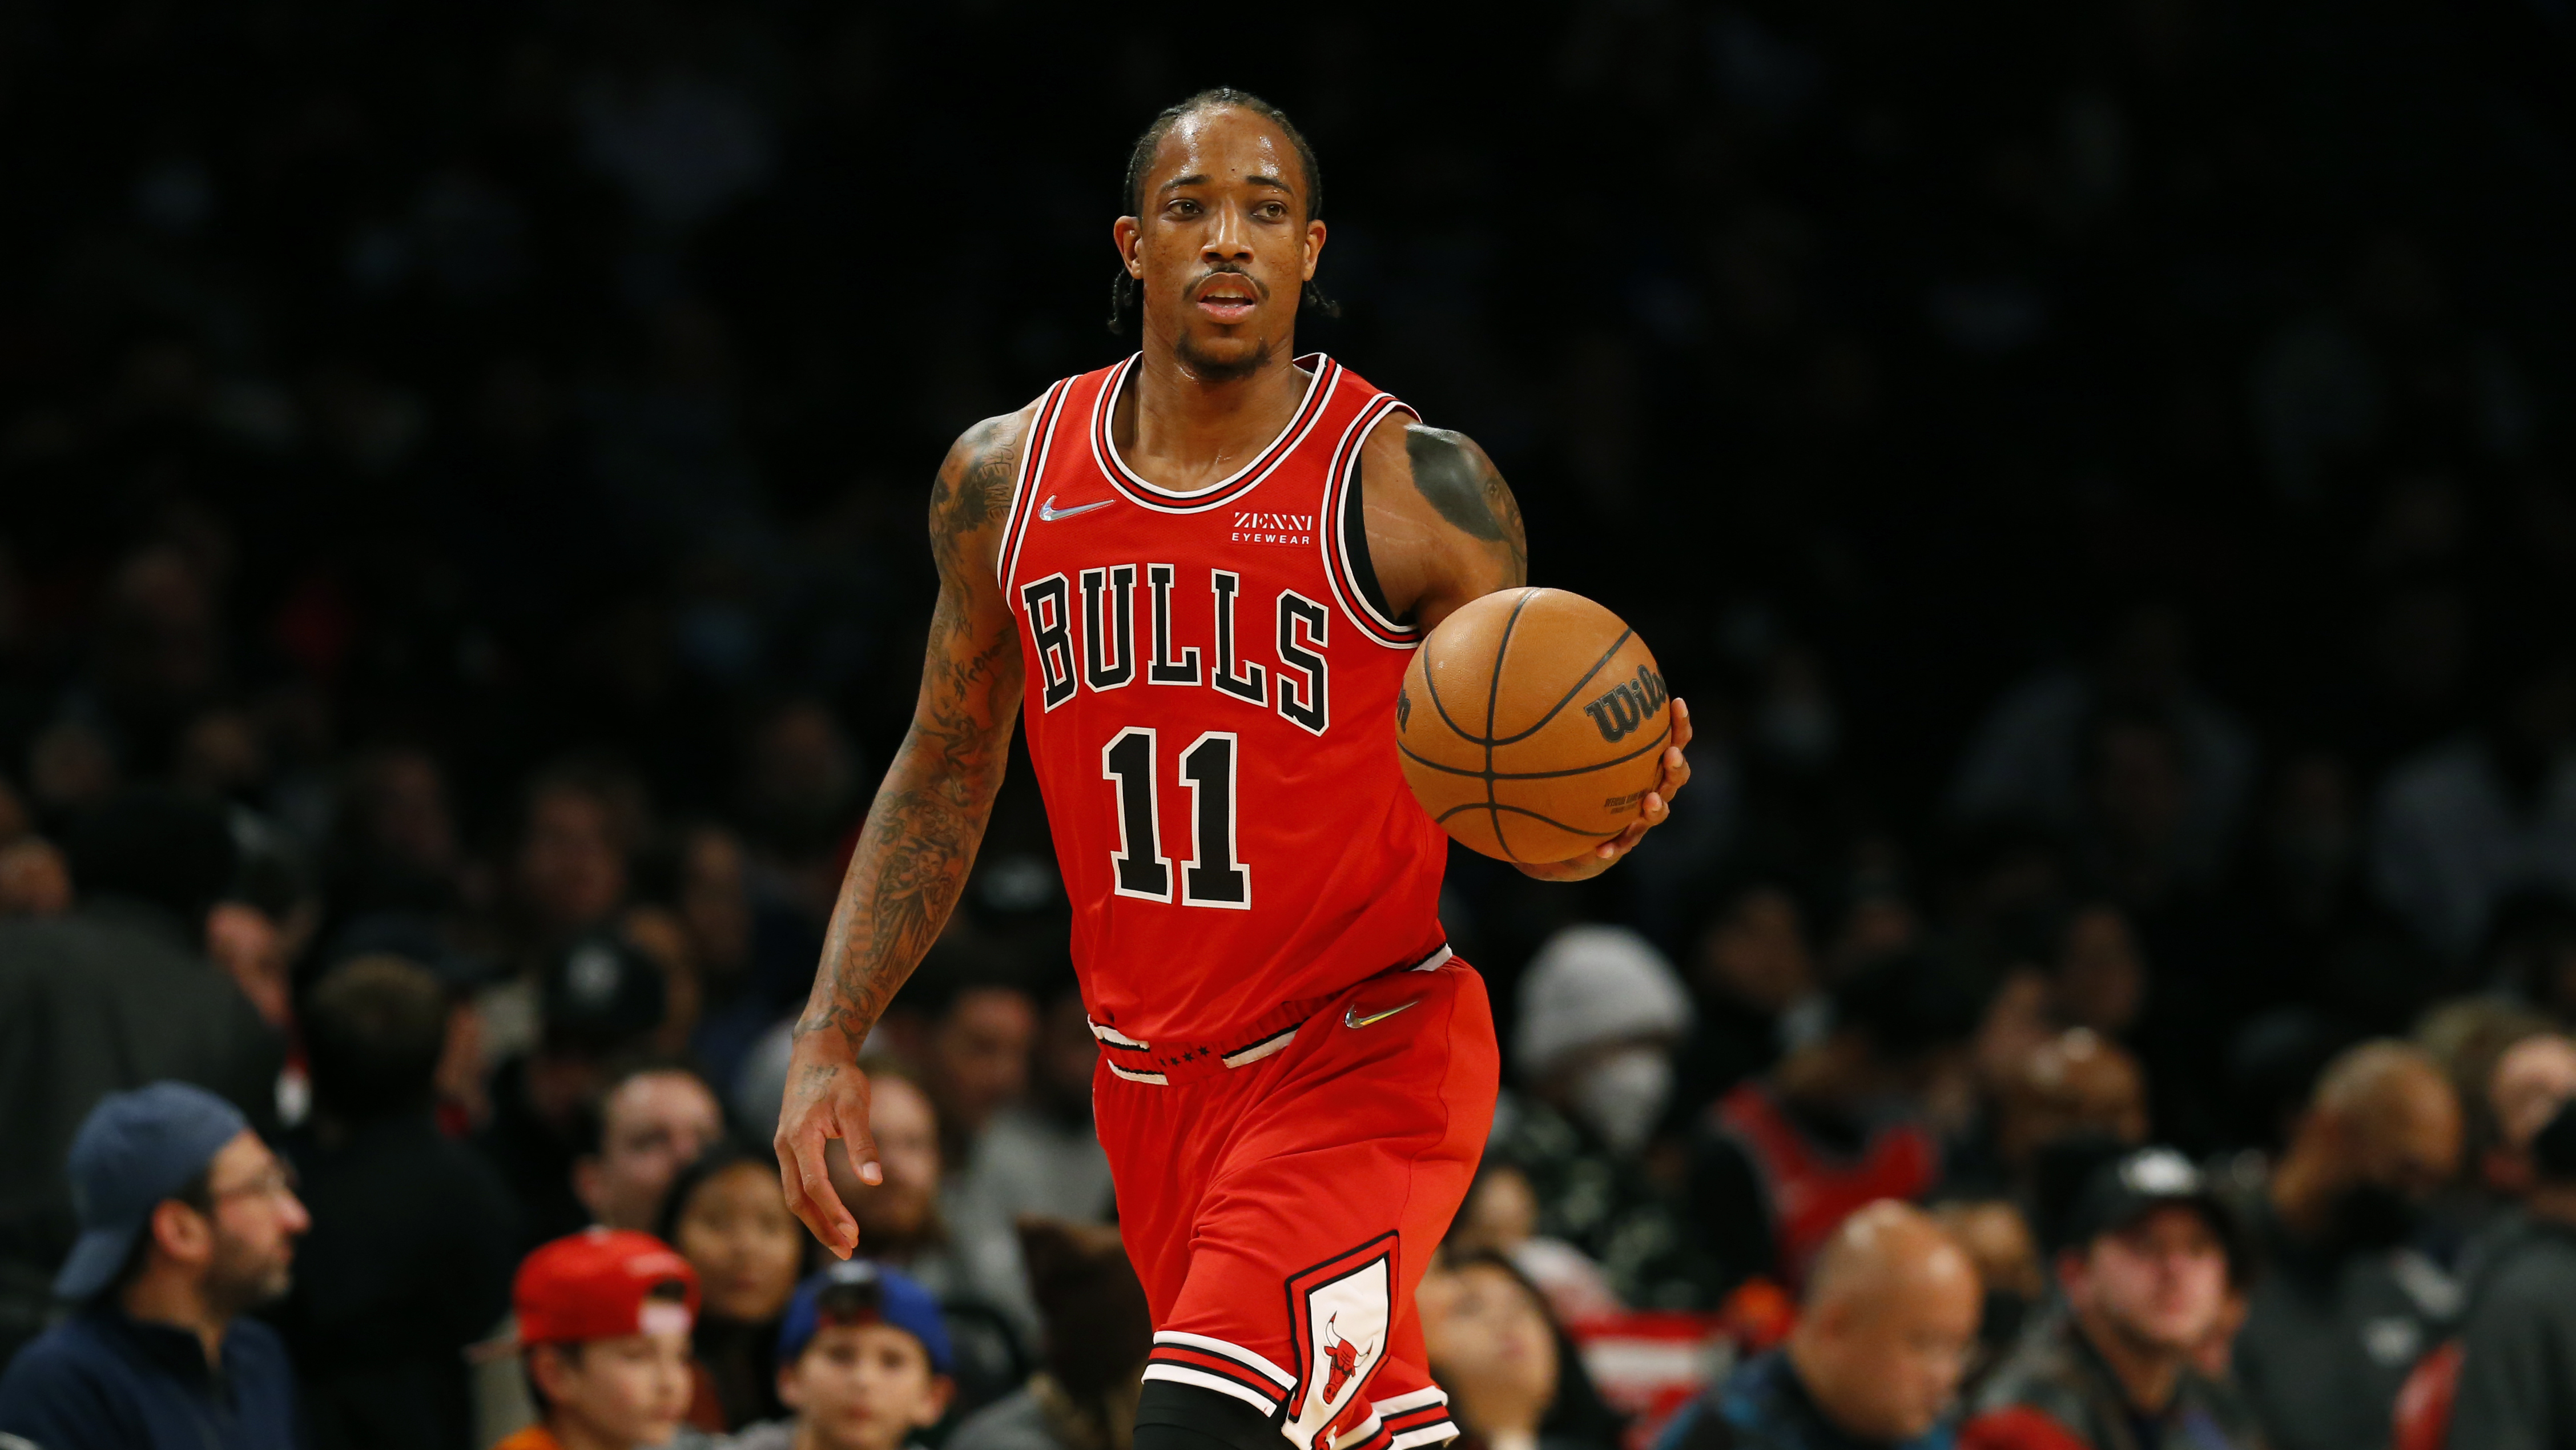 Bulls' DeMar DeRozan Placed in COVID-19 Protocols, Could Miss Several Games